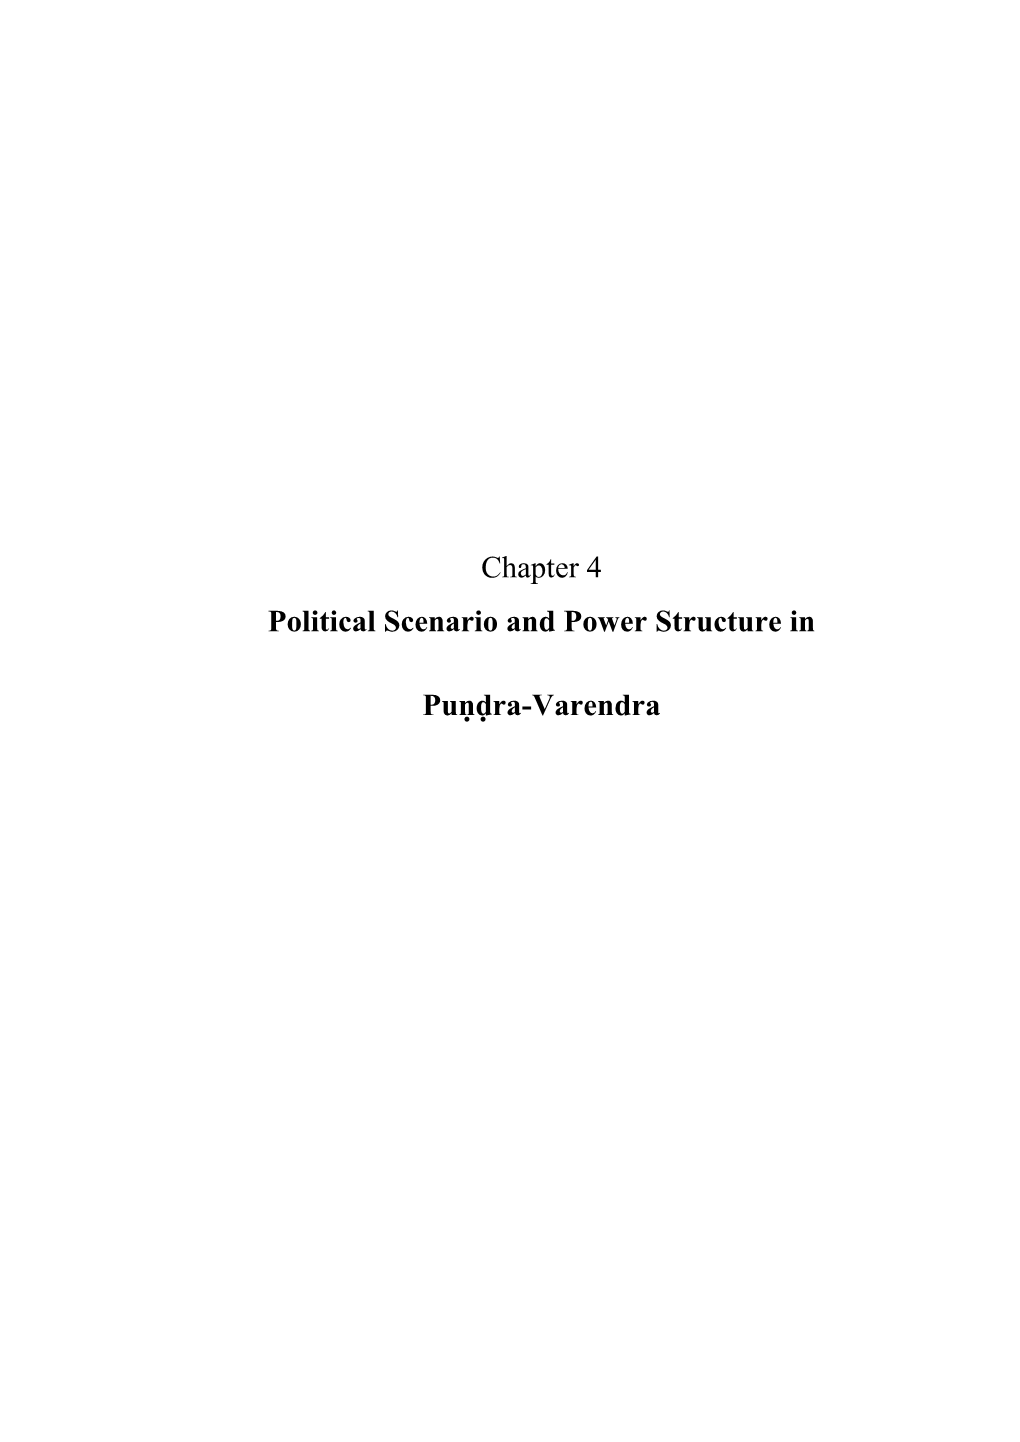 Chapter 4 Political Scenario and Power Structure in Puṇḍra-Varendra